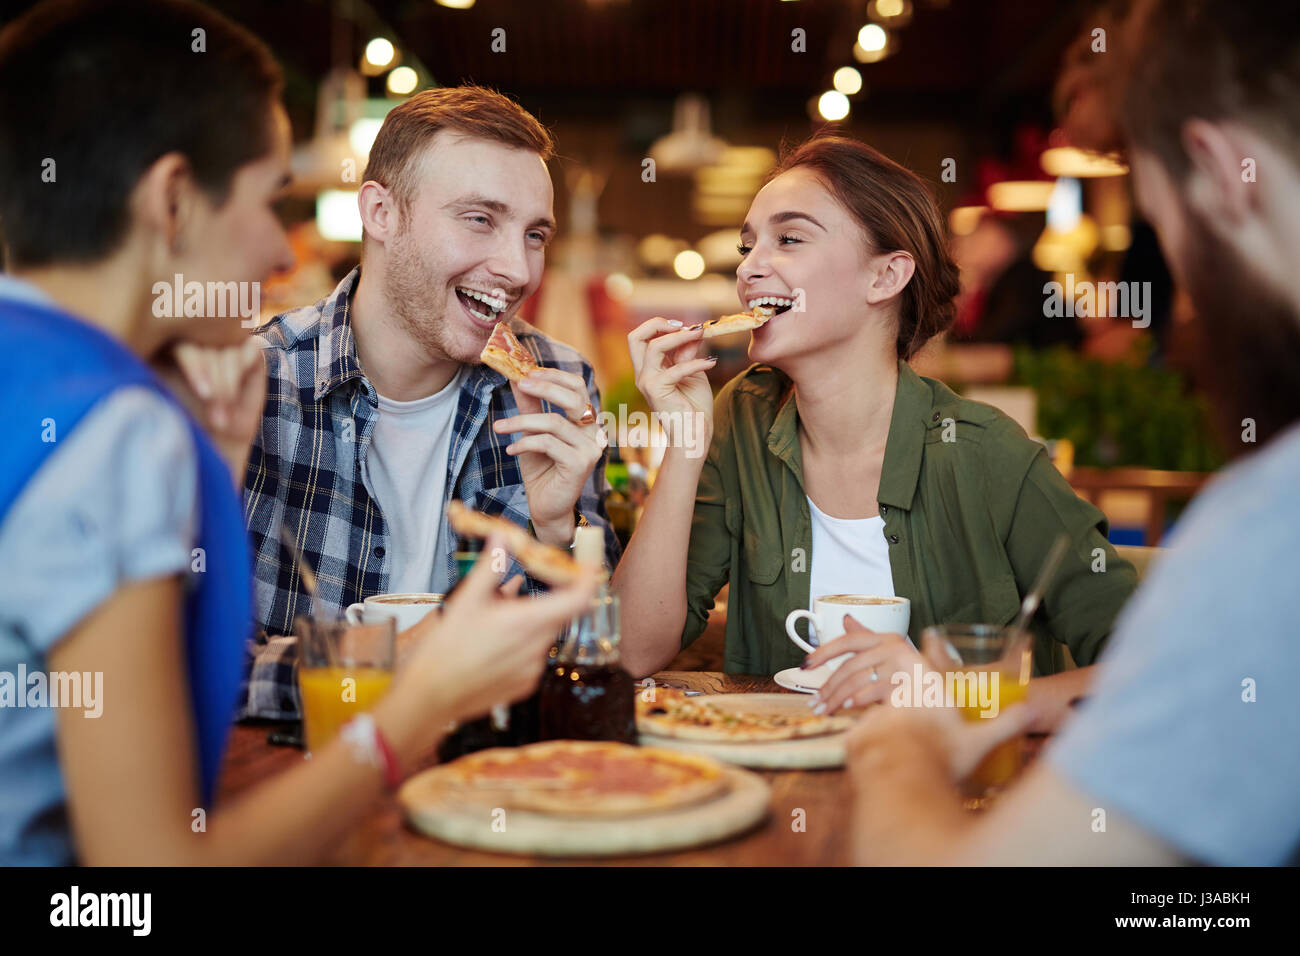 Group Of Friends Eating Pizza Together At Home Stock Photo, Picture and  Royalty Free Image. Image 56950664.